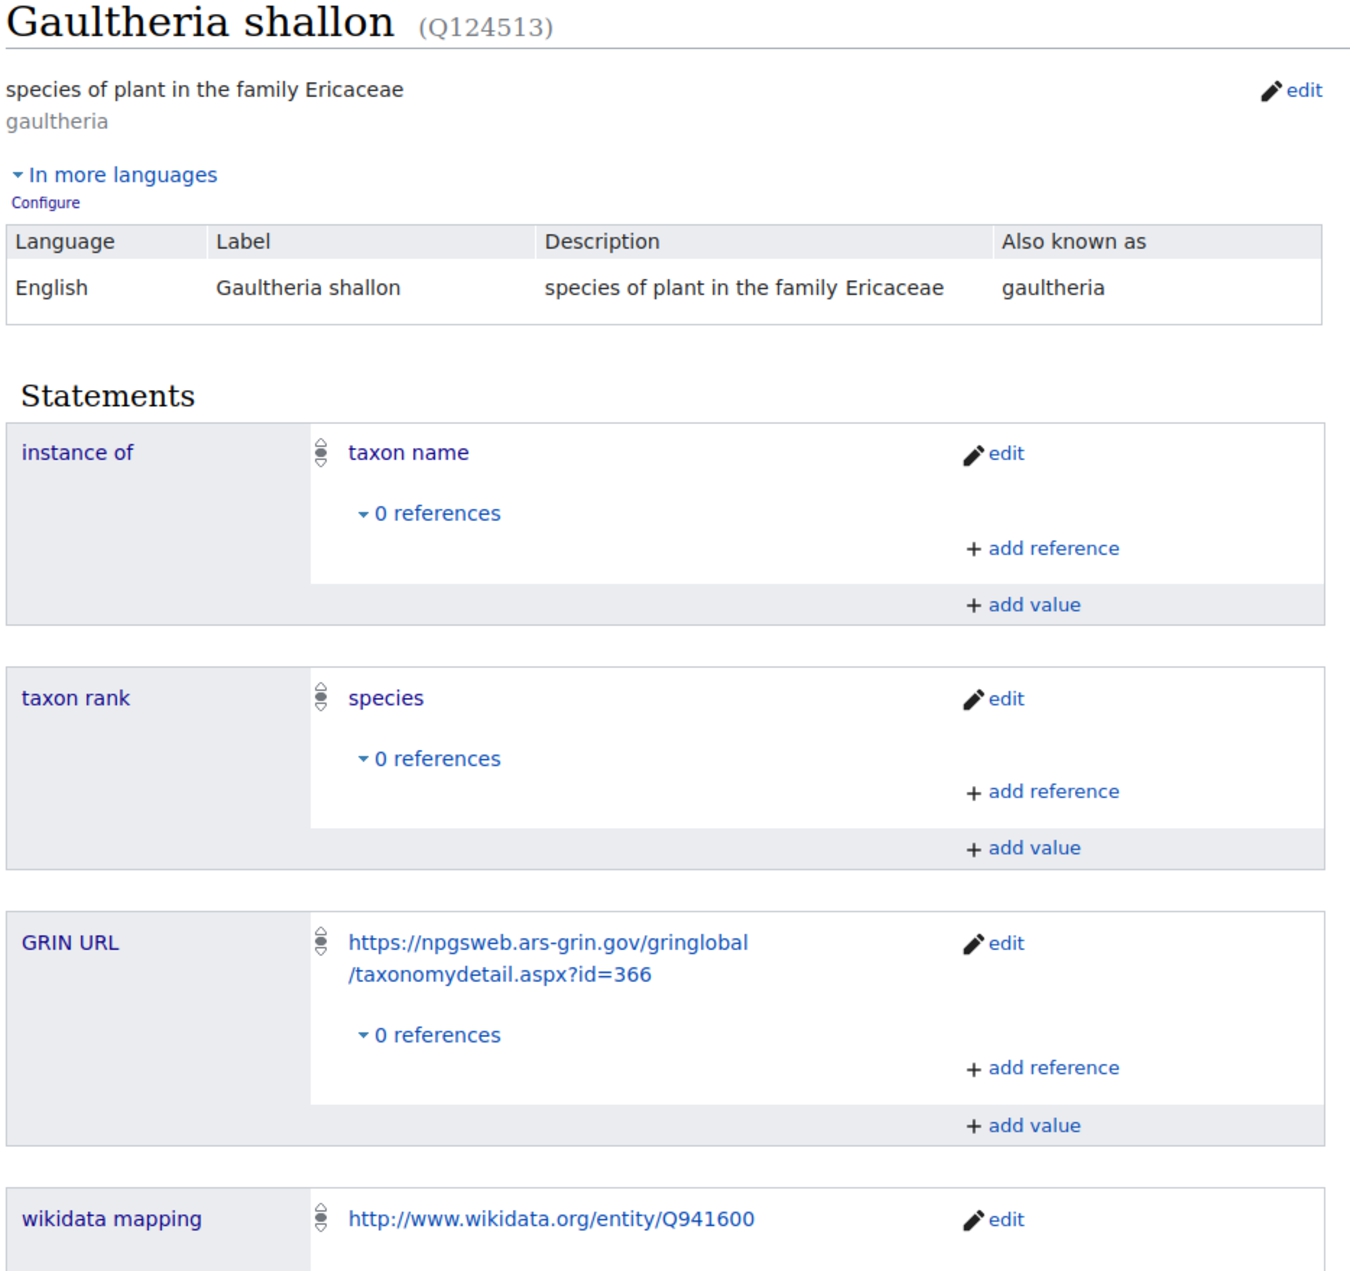 Item for Gaultheria shallon in WikiFCD showing Wikidata mapping.